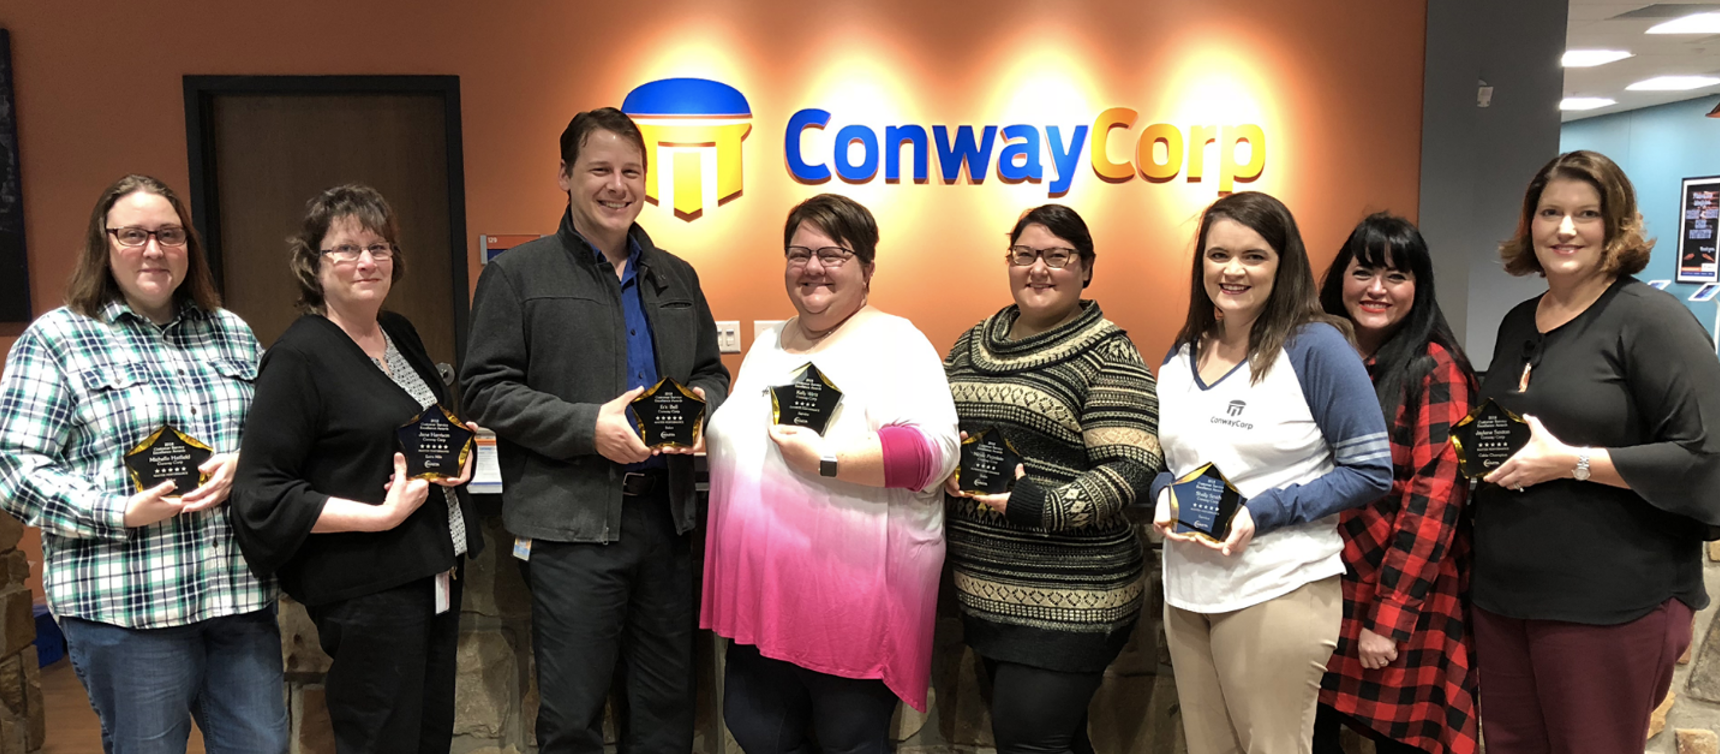 Customer Service employees earn recognition